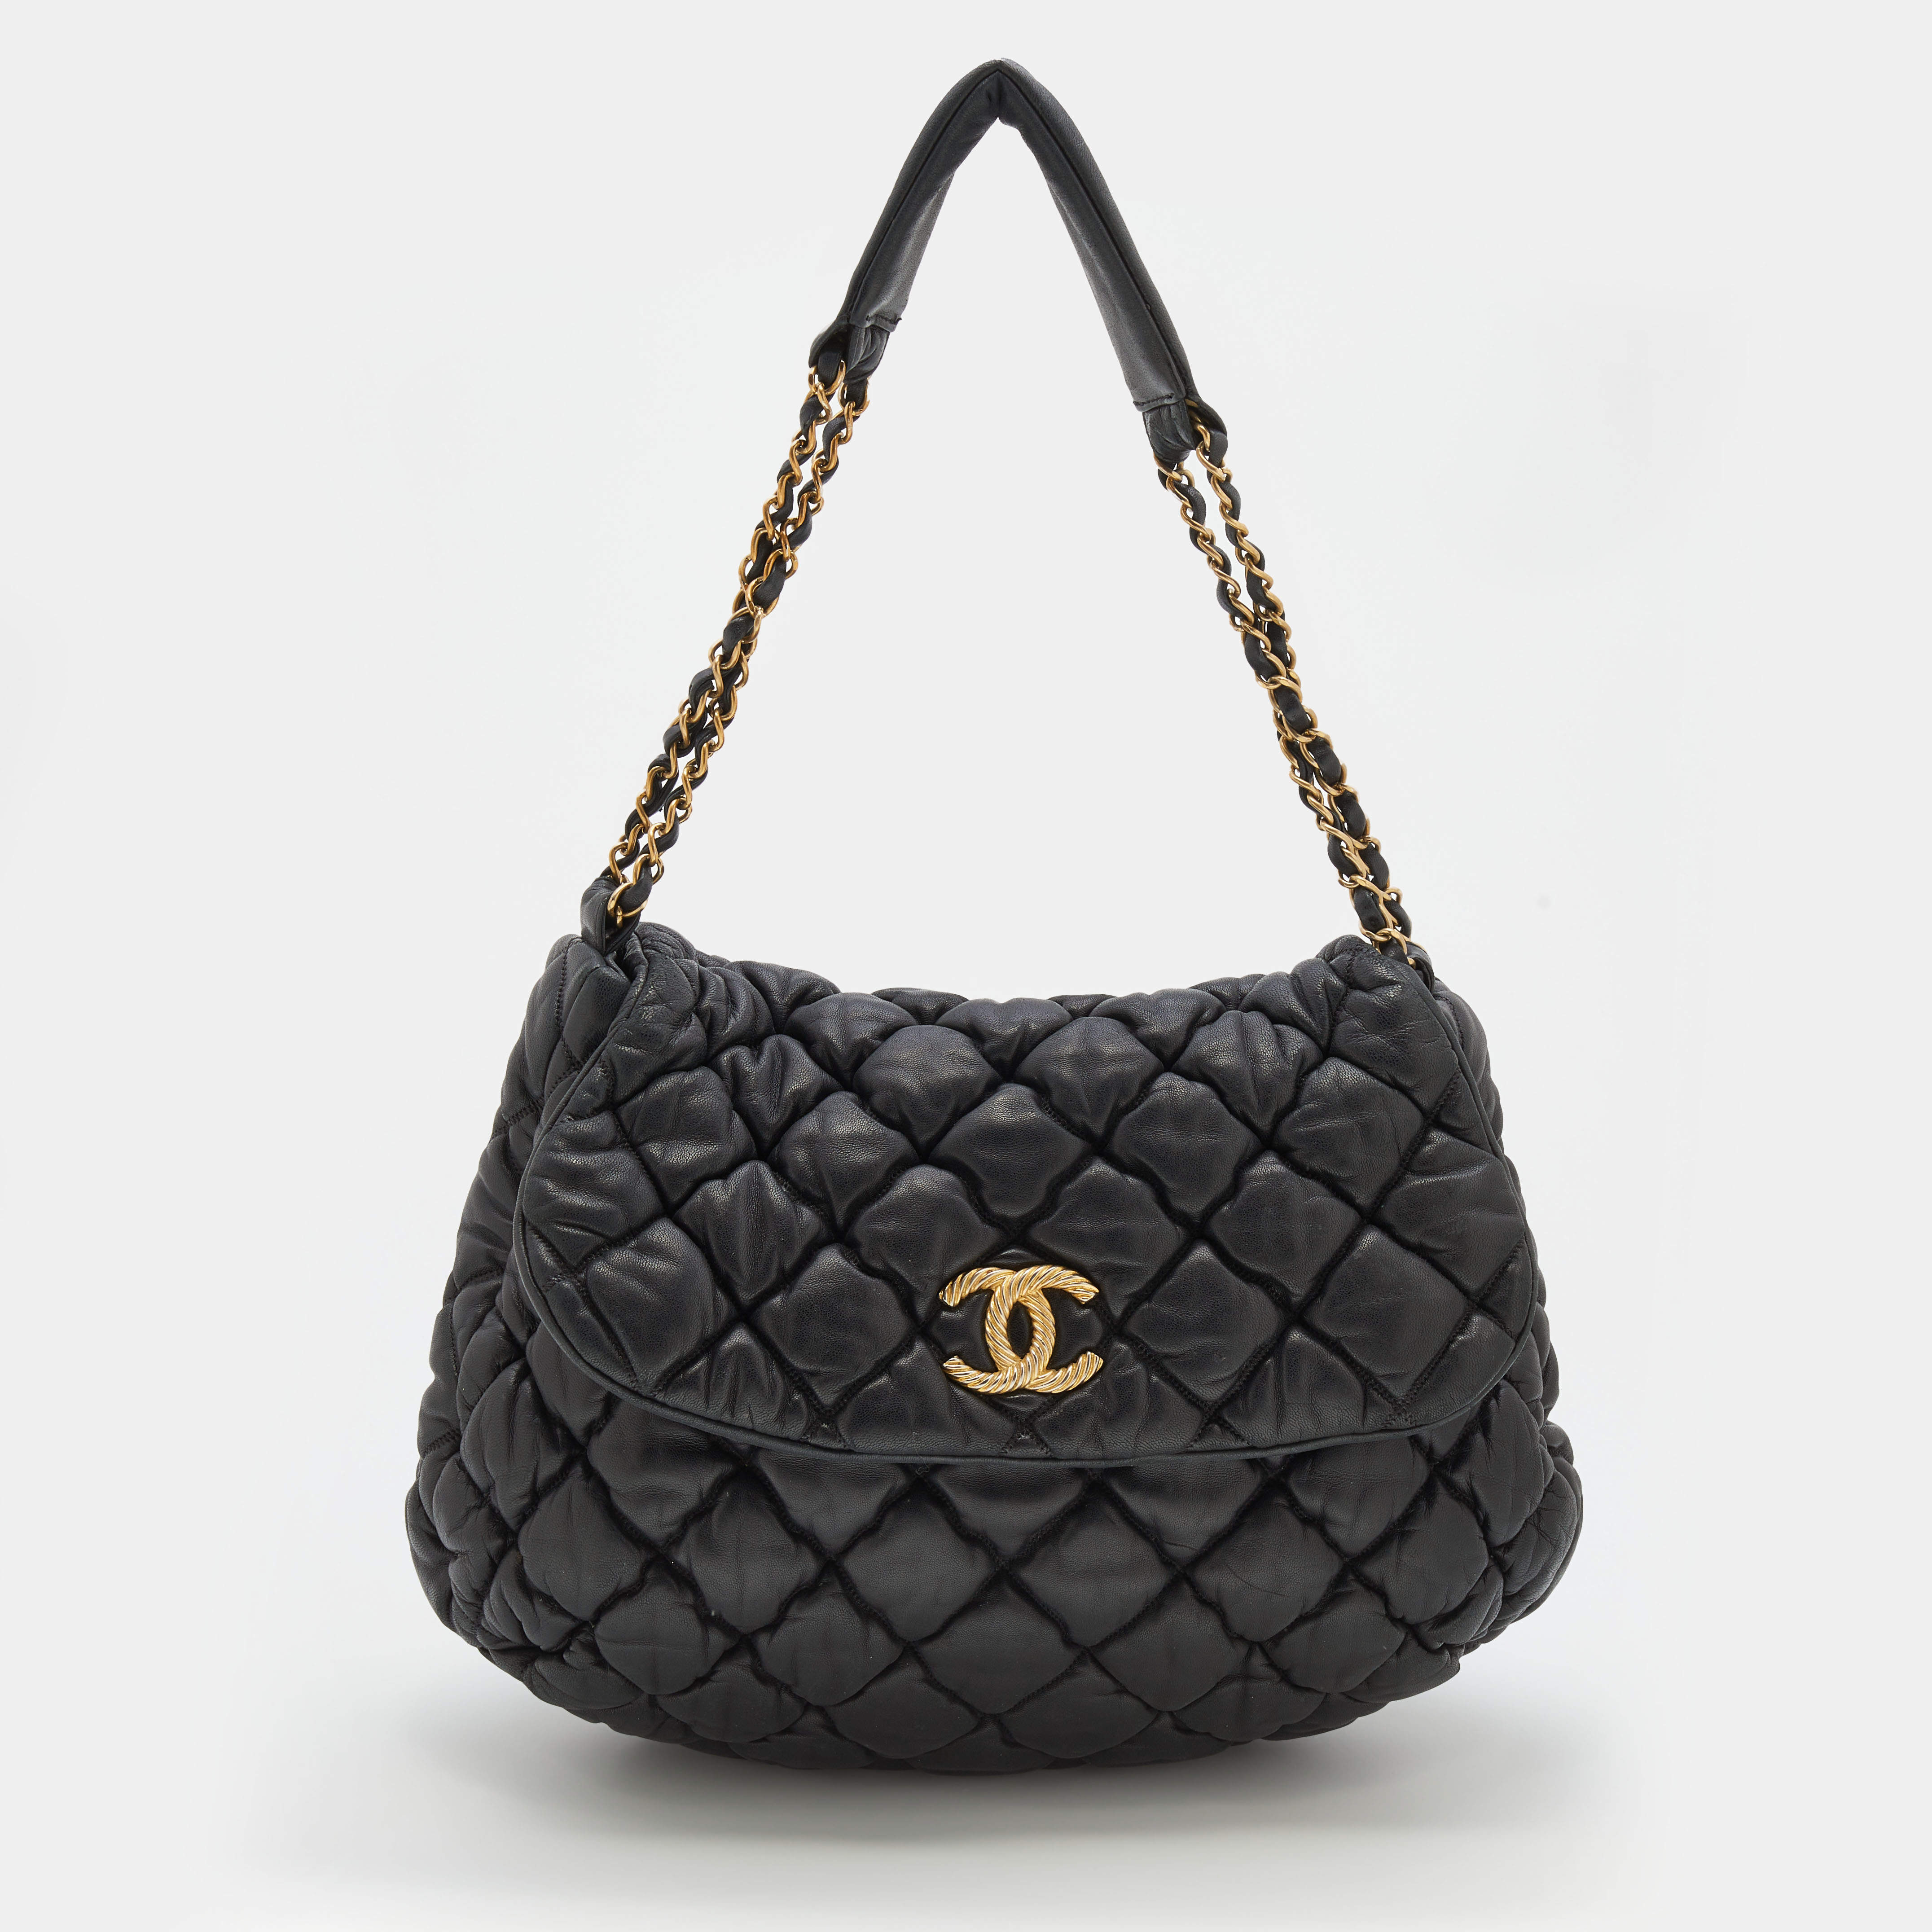 Chanel Black Quilted Leather Bubble Flap Bag